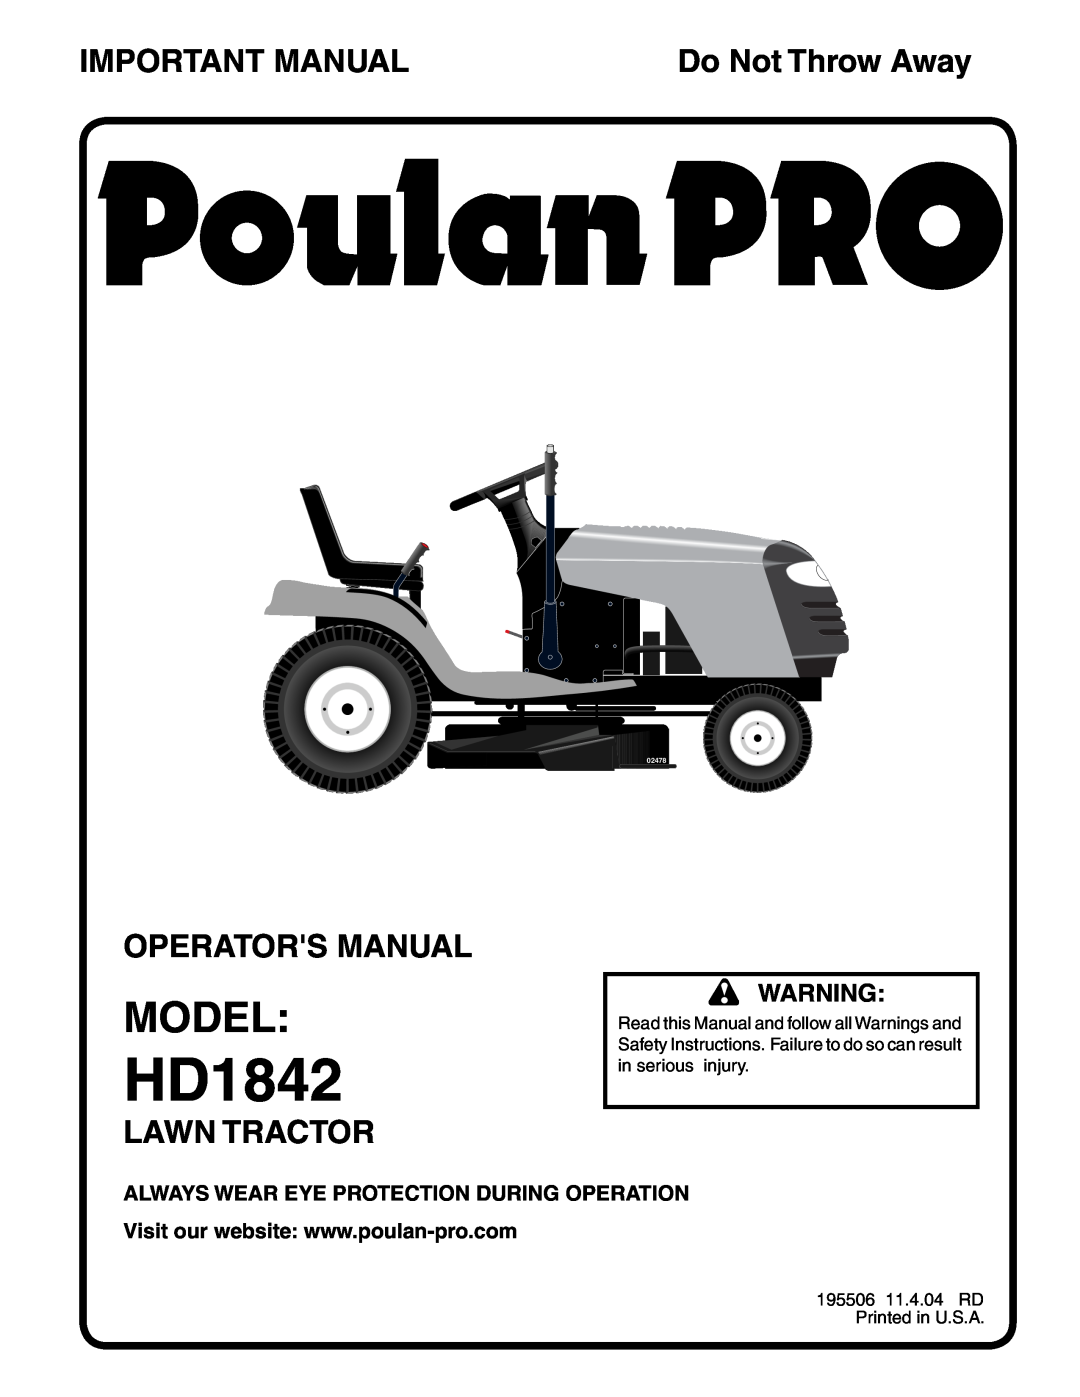 Poulan 195506 manual Model, Important Manual, Operators Manual, Lawn Tractor, Always Wear Eye Protection During Operation 